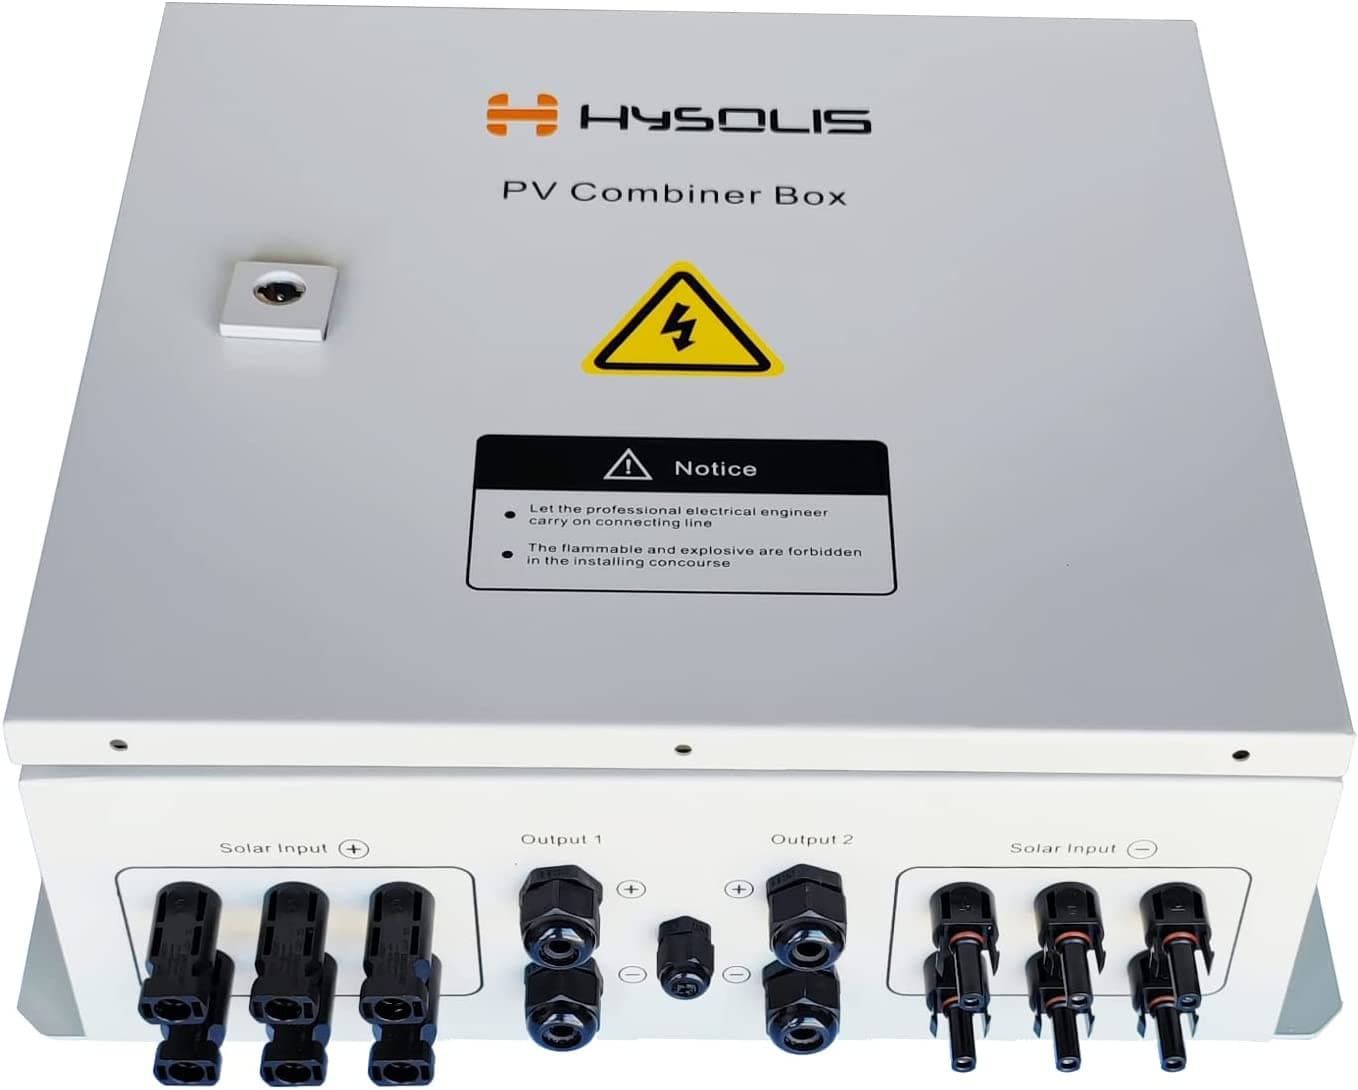 HYSOLIS|6.5kW Solar Power System+10kWh Lithium-Iron Battery+4-8kW PV Complete kit-EcoPowerit